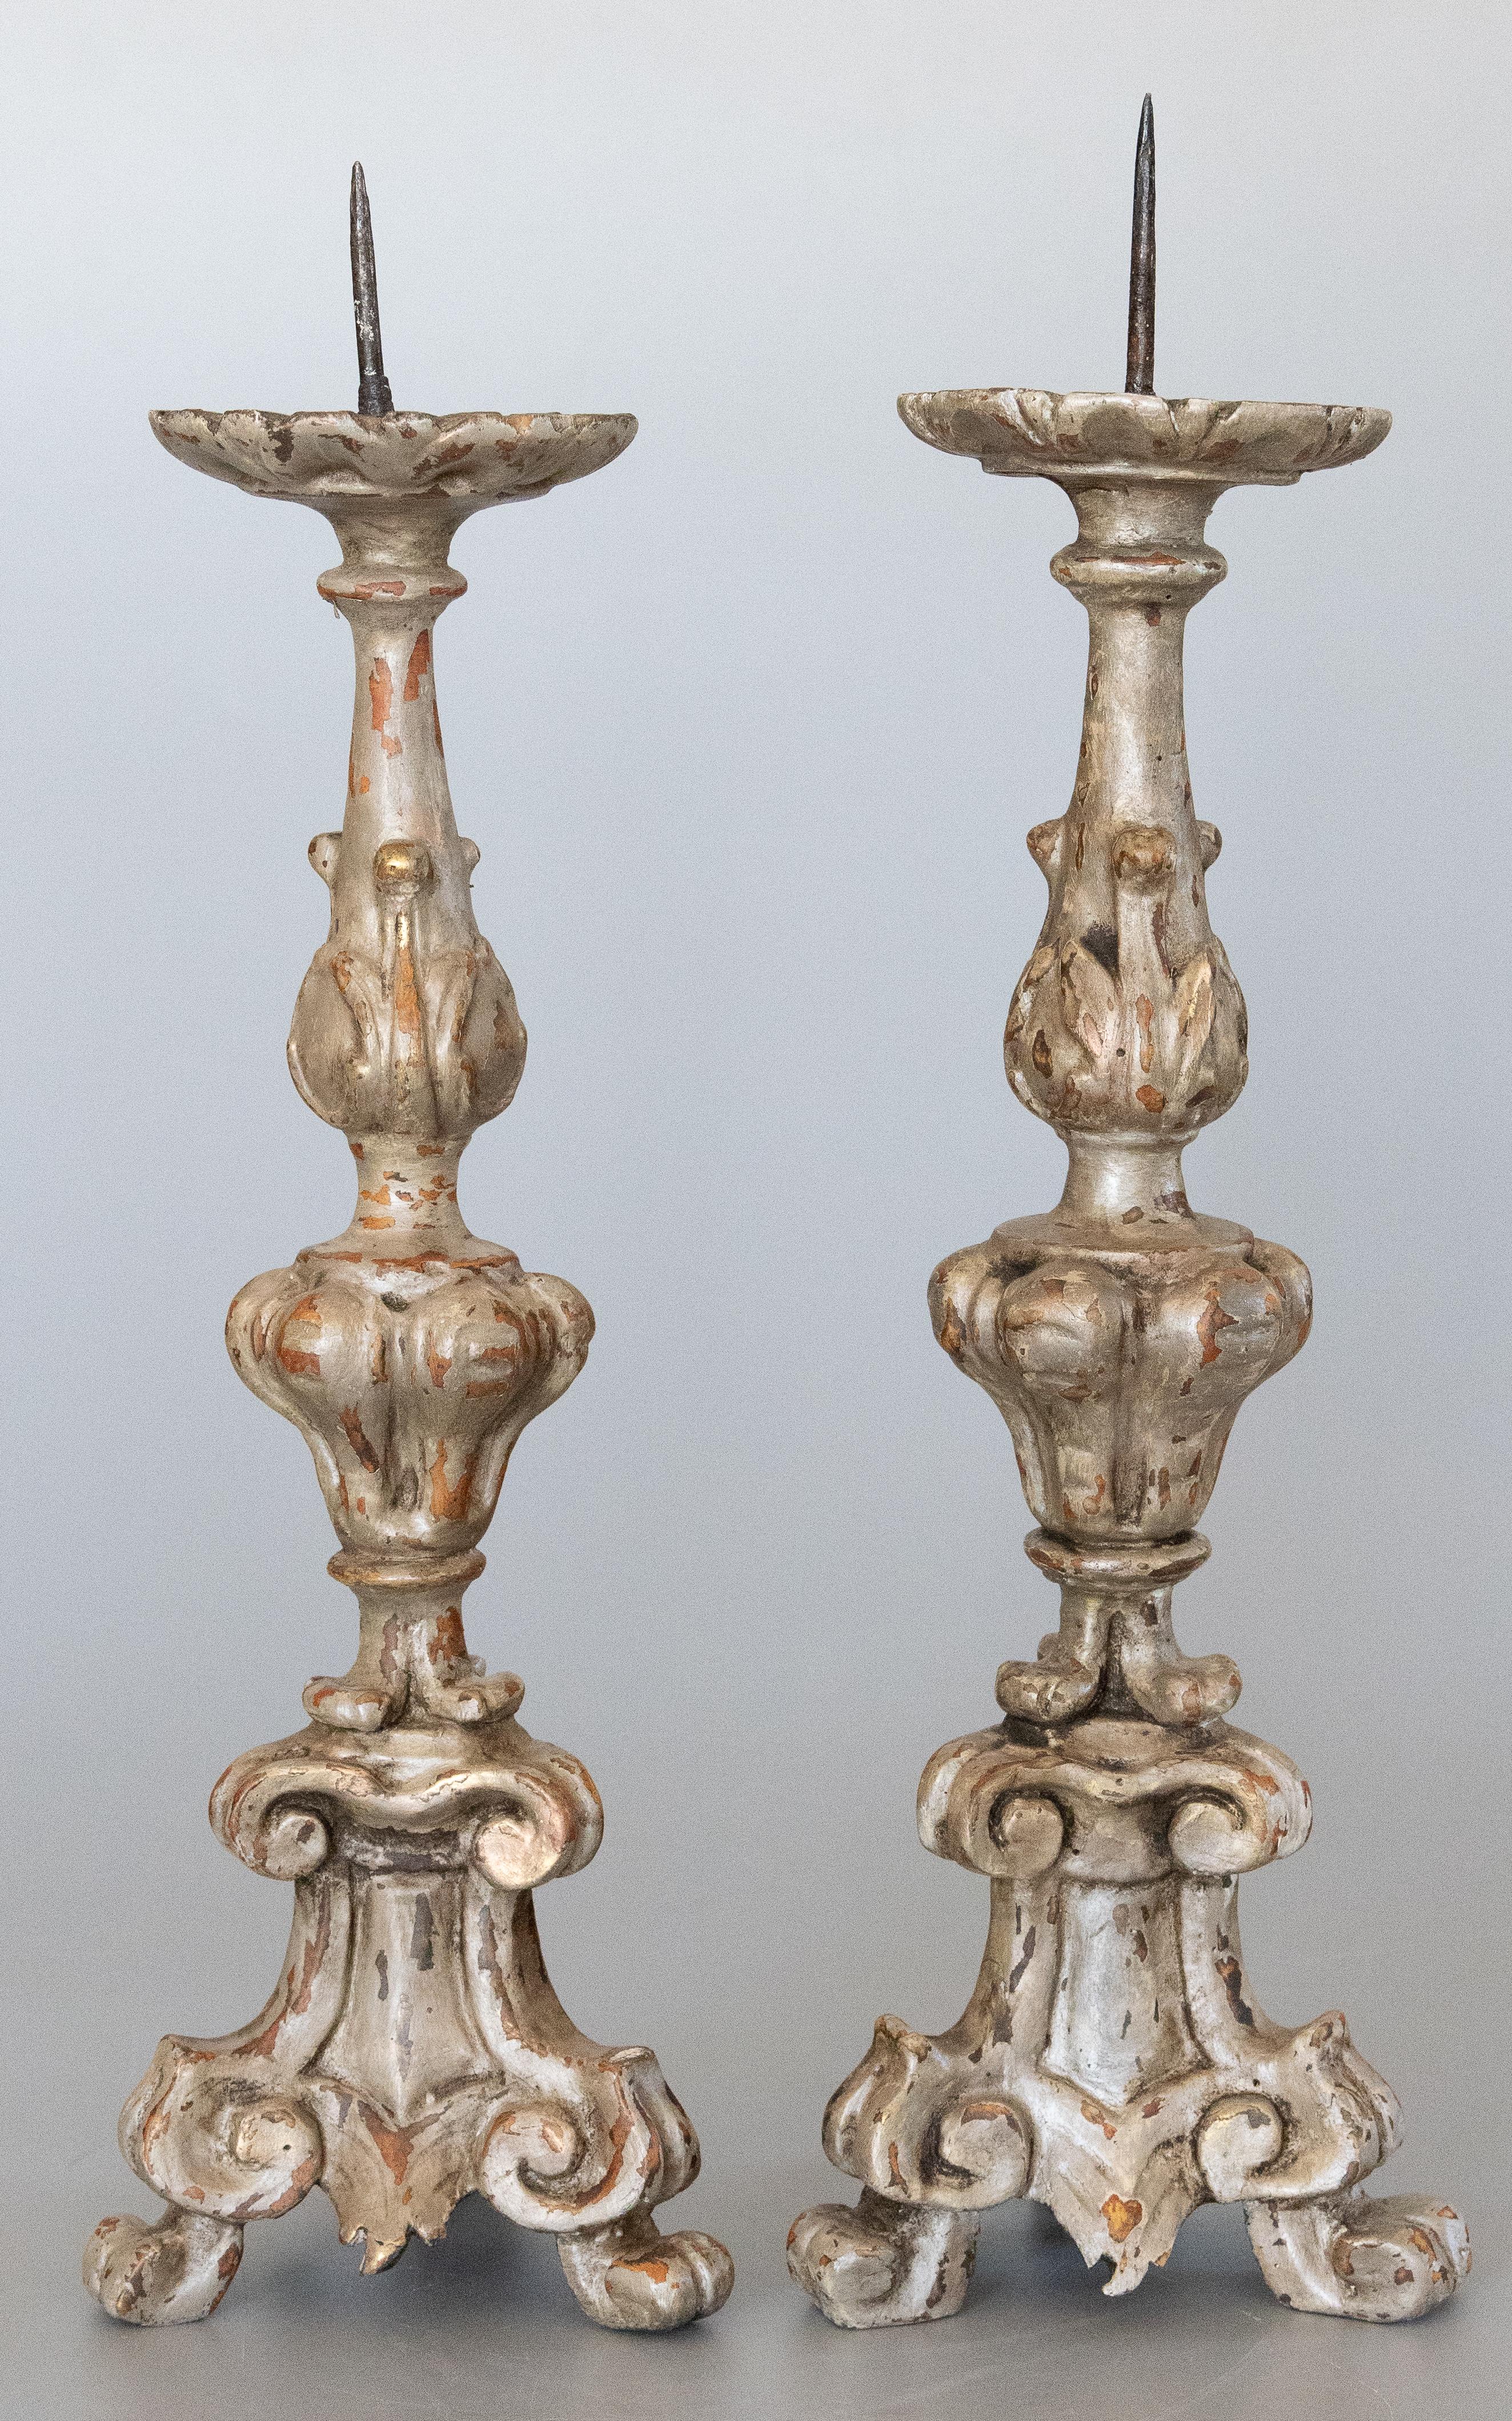 Neoclassical Pair of 18th Century Italian Silver Gilt Wood Pricket Candlesticks For Sale